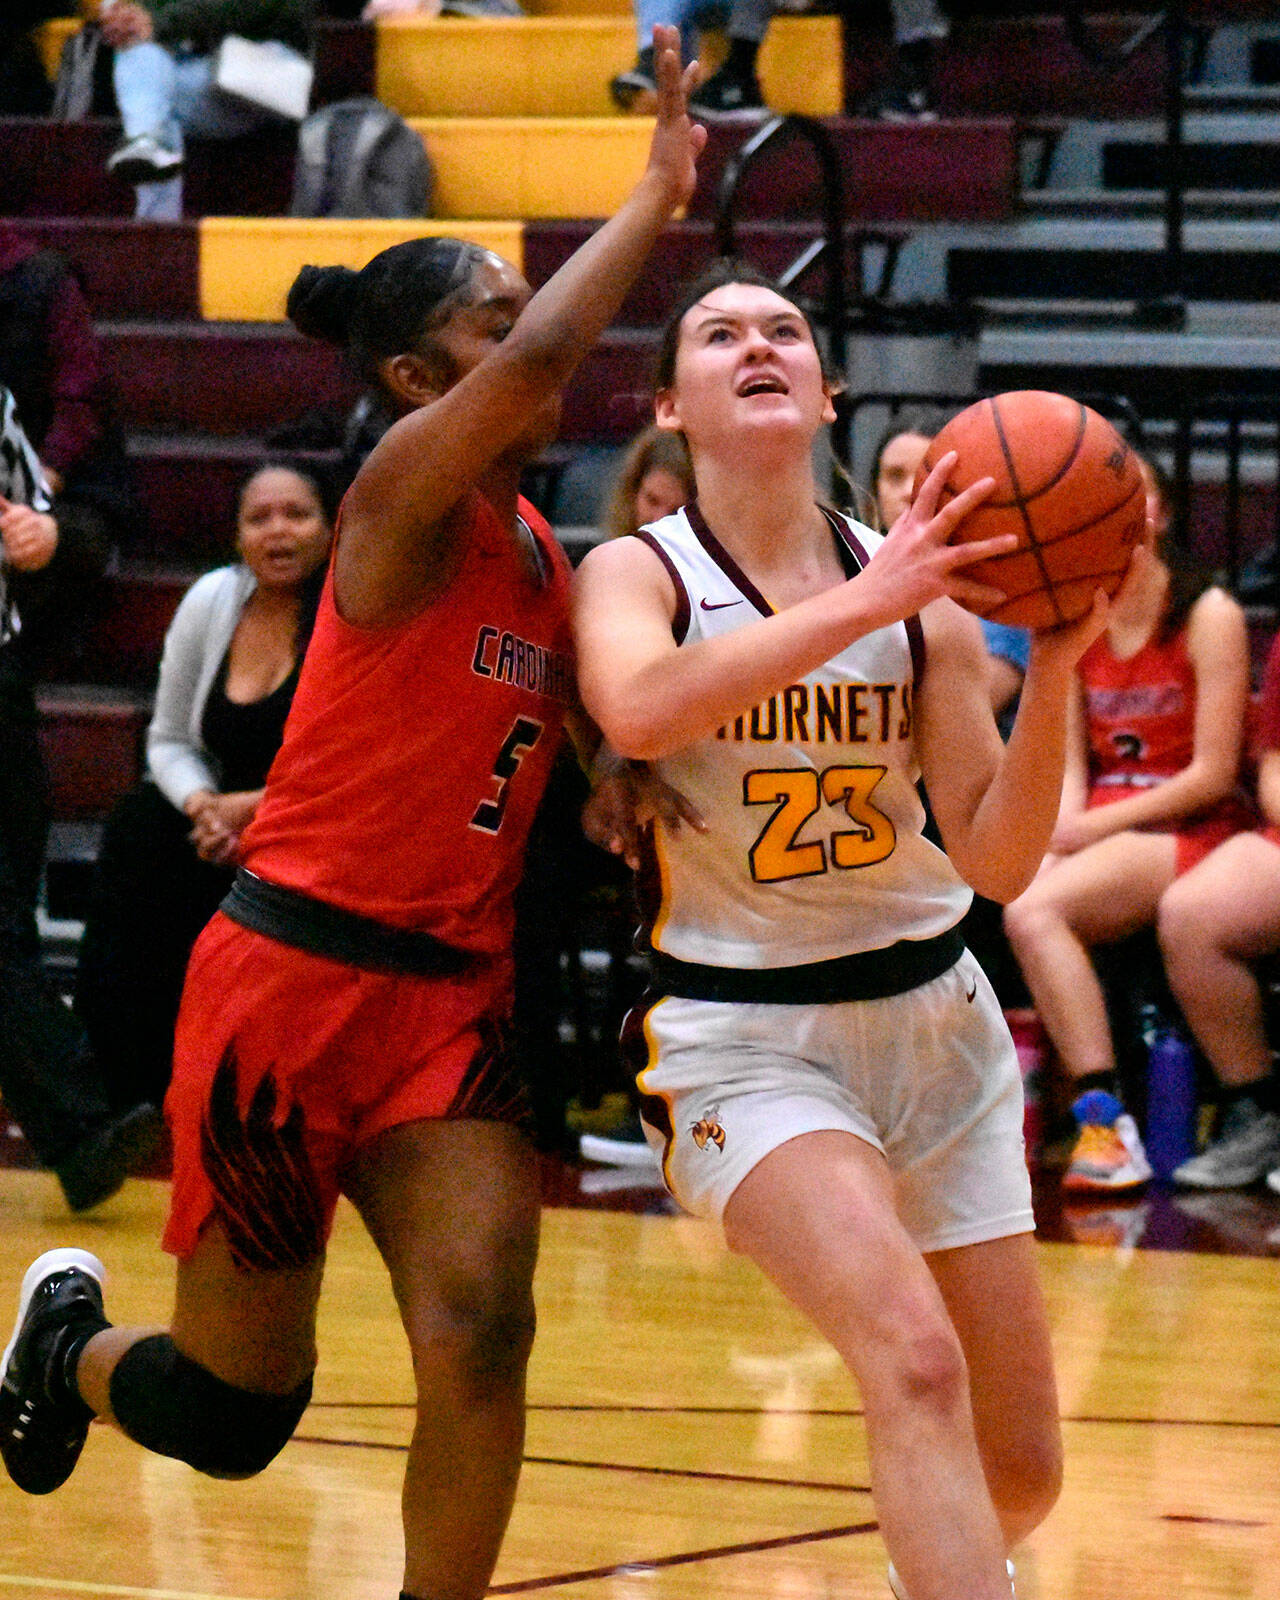 Ally Green (23) gets fouled during a drive to the hoop. Photo by Kevin Hanson